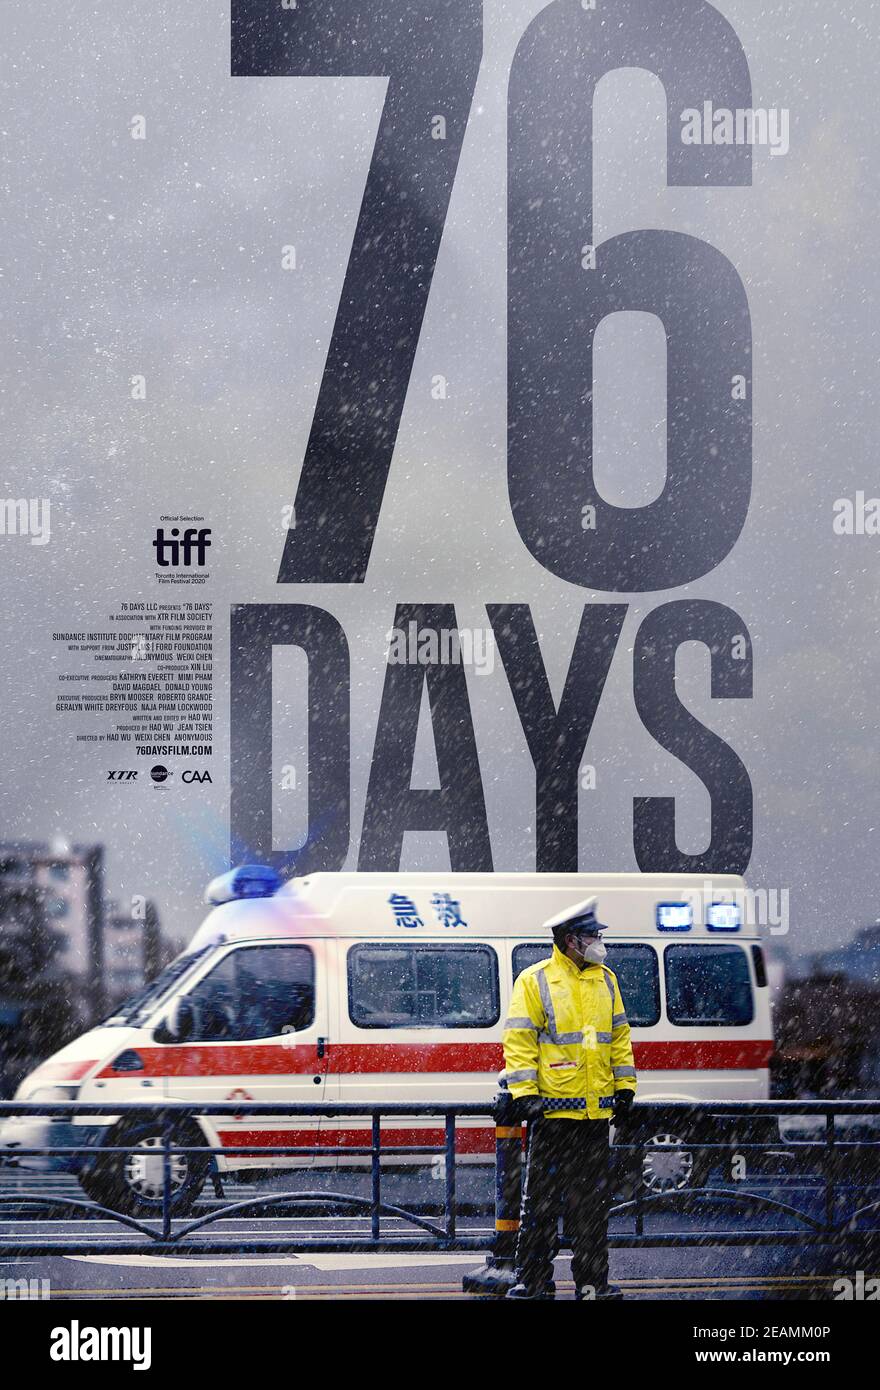 76 Days (2020) directed by Weixi Chen and Hao Wu. Documentary about the patients and frontline medical professionals battling the COVID-19 pandemic during its first days in Wuhan, China. Stock Photo